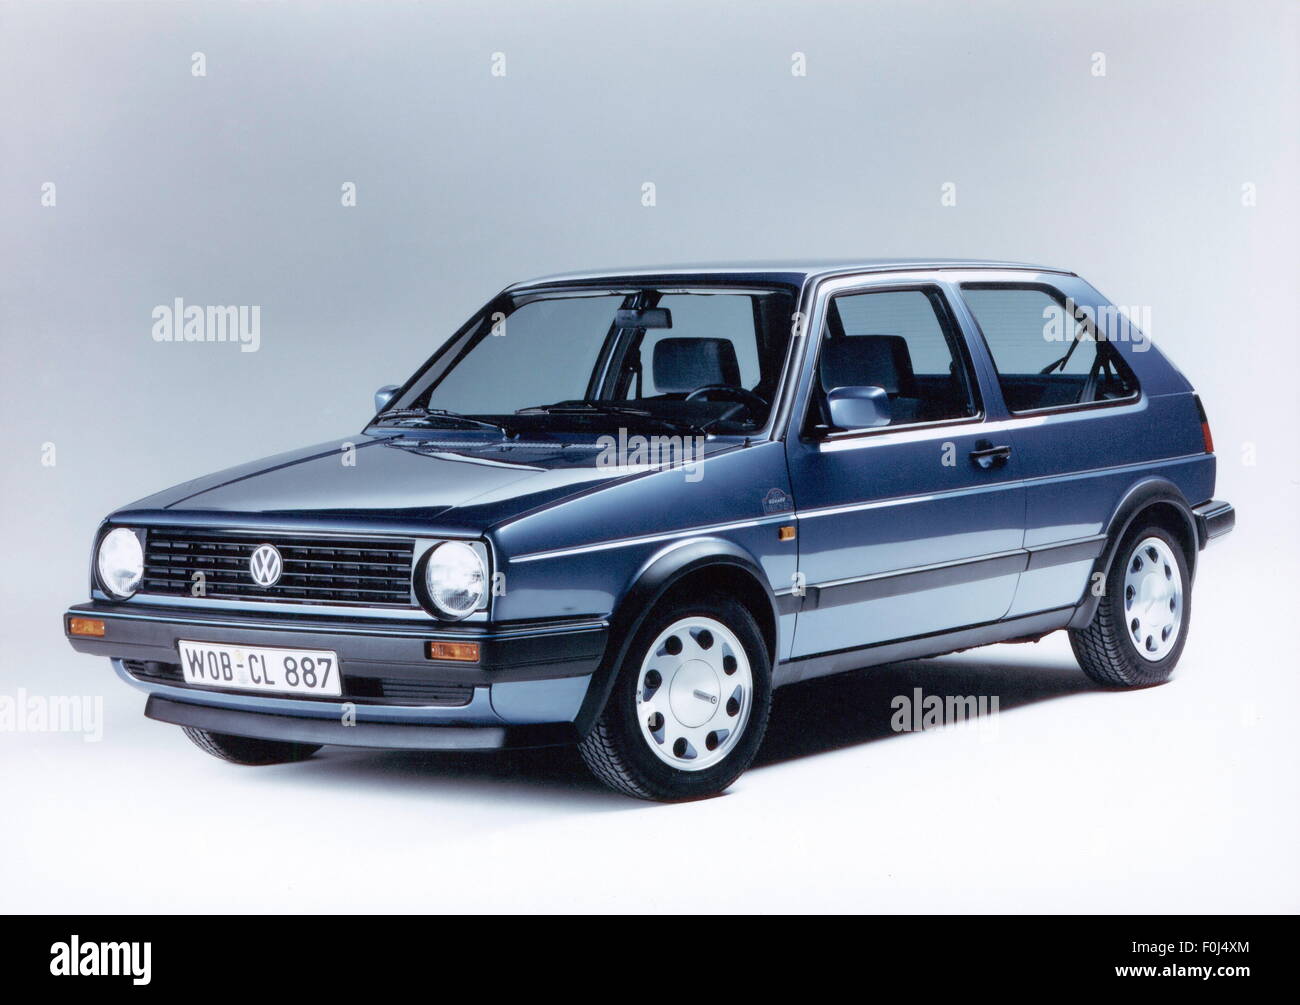 transport, car, vehicle variants, Volkswagen, VW Golf Mk2 CL, 1990, Additional-Rights-Clearences-Not Available Stock Photo